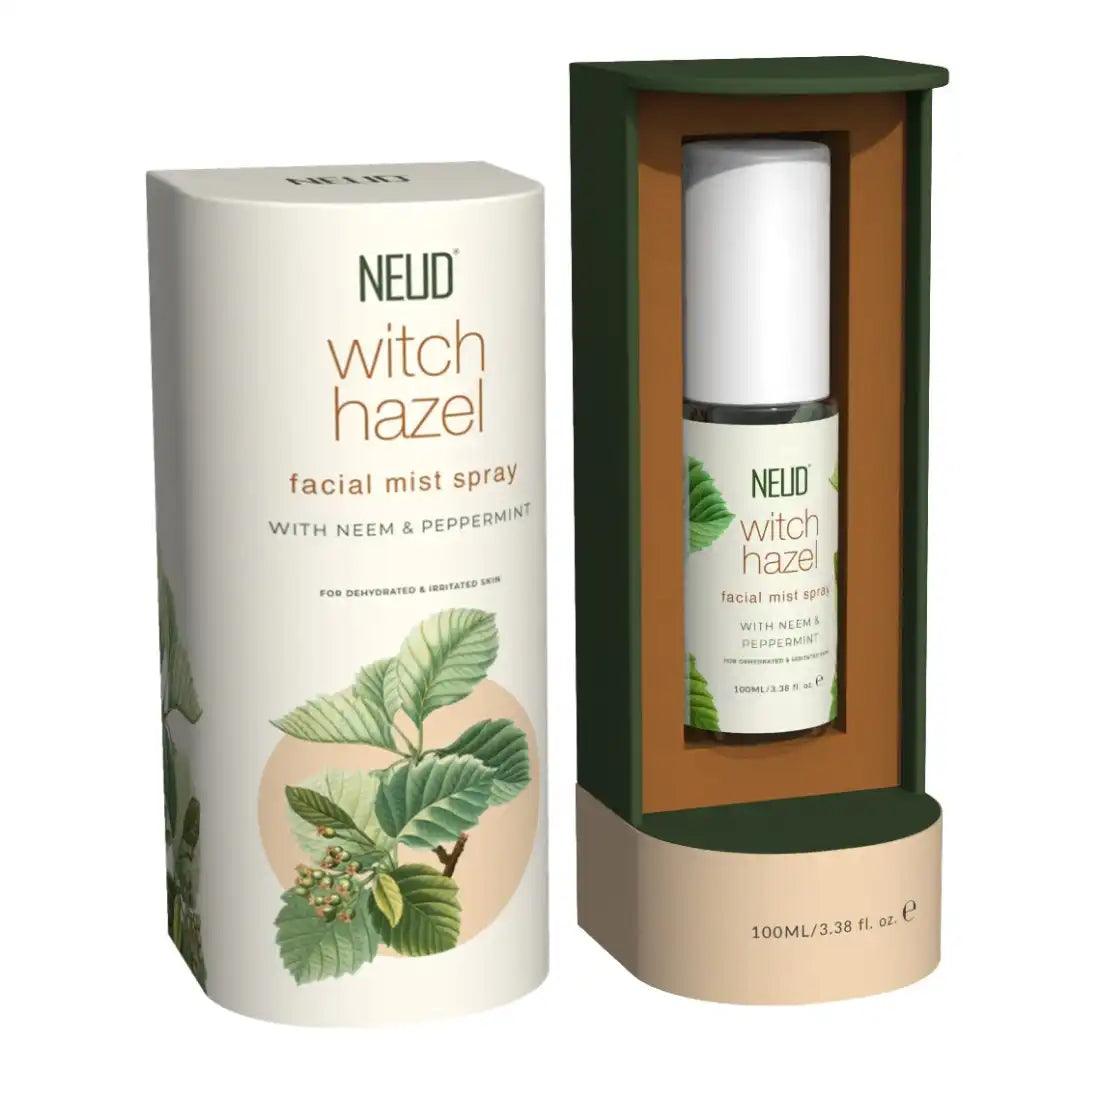 Buy 1 Pack NEUD Witch Hazel Facial Mist Spray 100ml For Dehydrated and Irritated Skin - everteen-neud.com